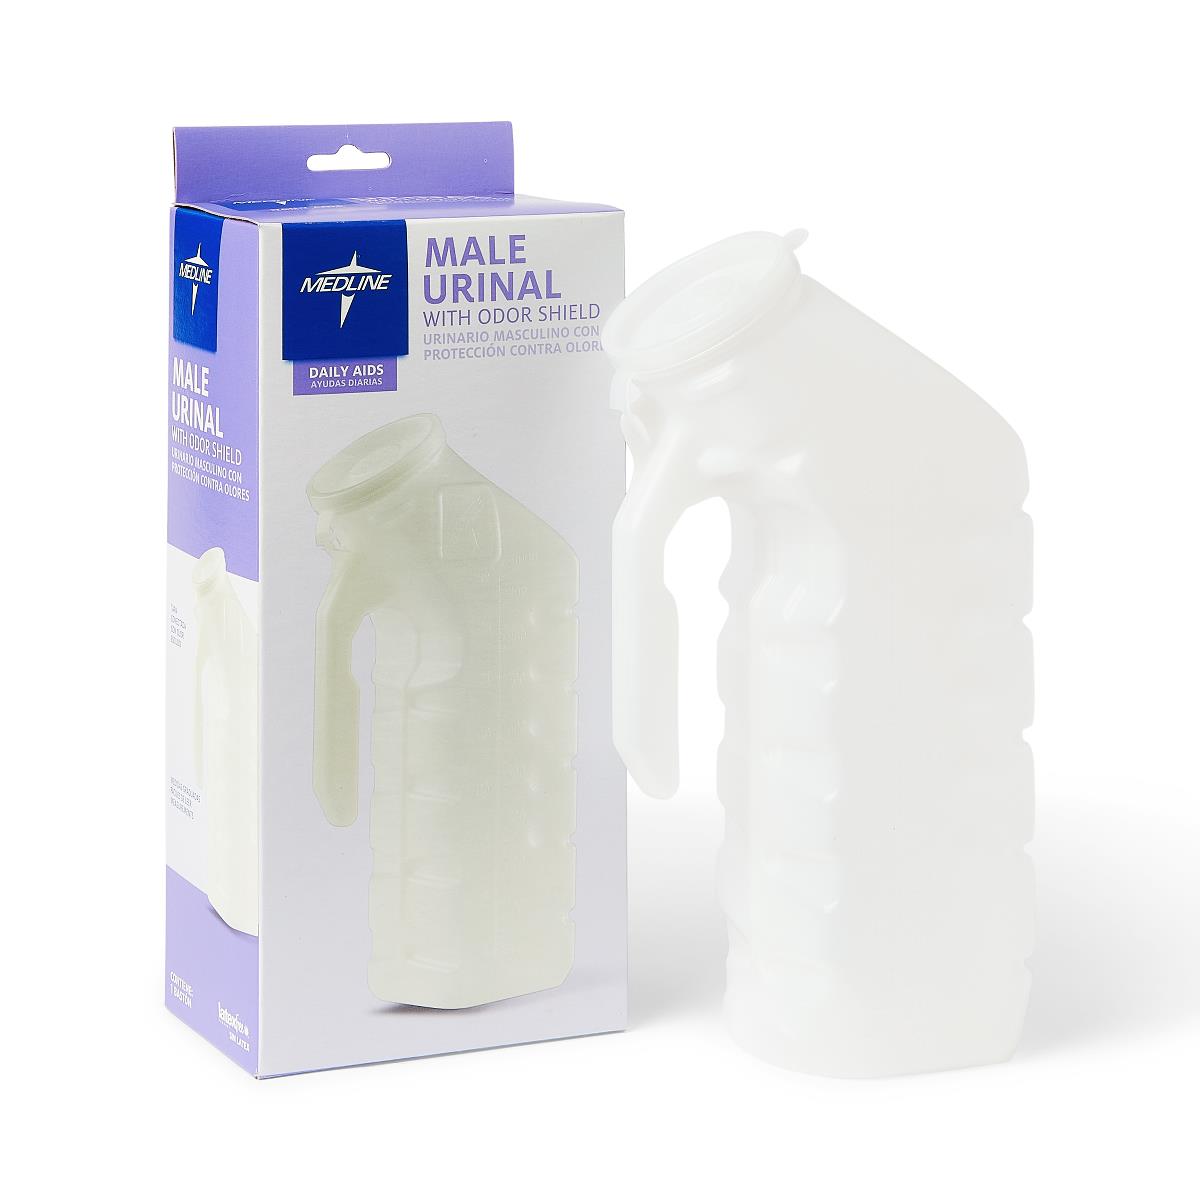 Male Urinal, Retail Packaging